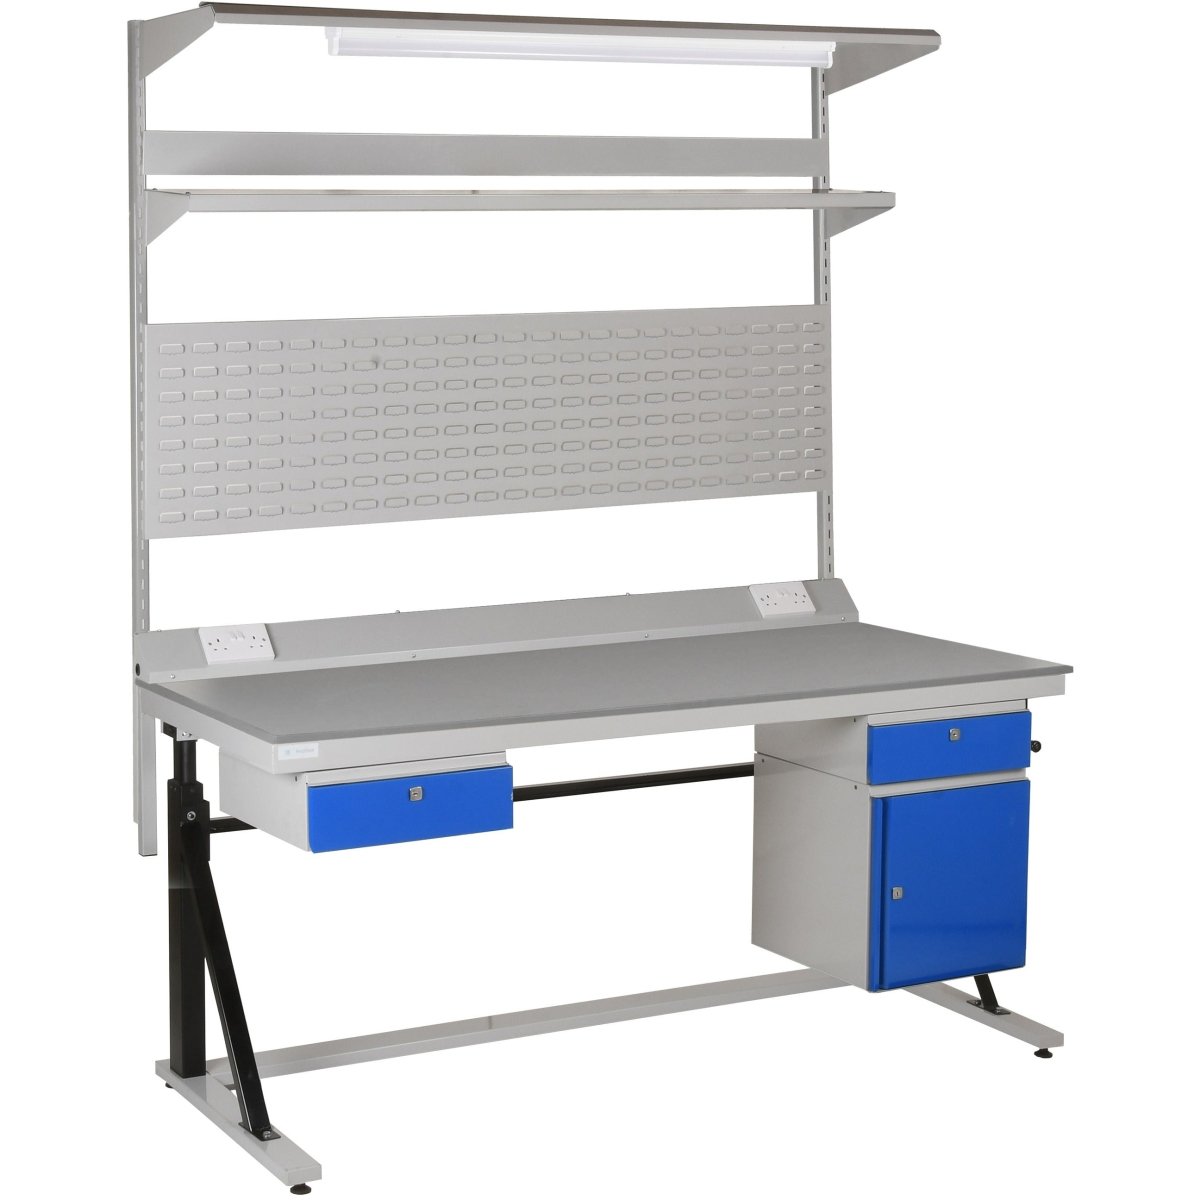 Redditek Cantilever Height Adjustable Work Bench With Accessory Combinations As Illustrated - Warehouse Storage Products